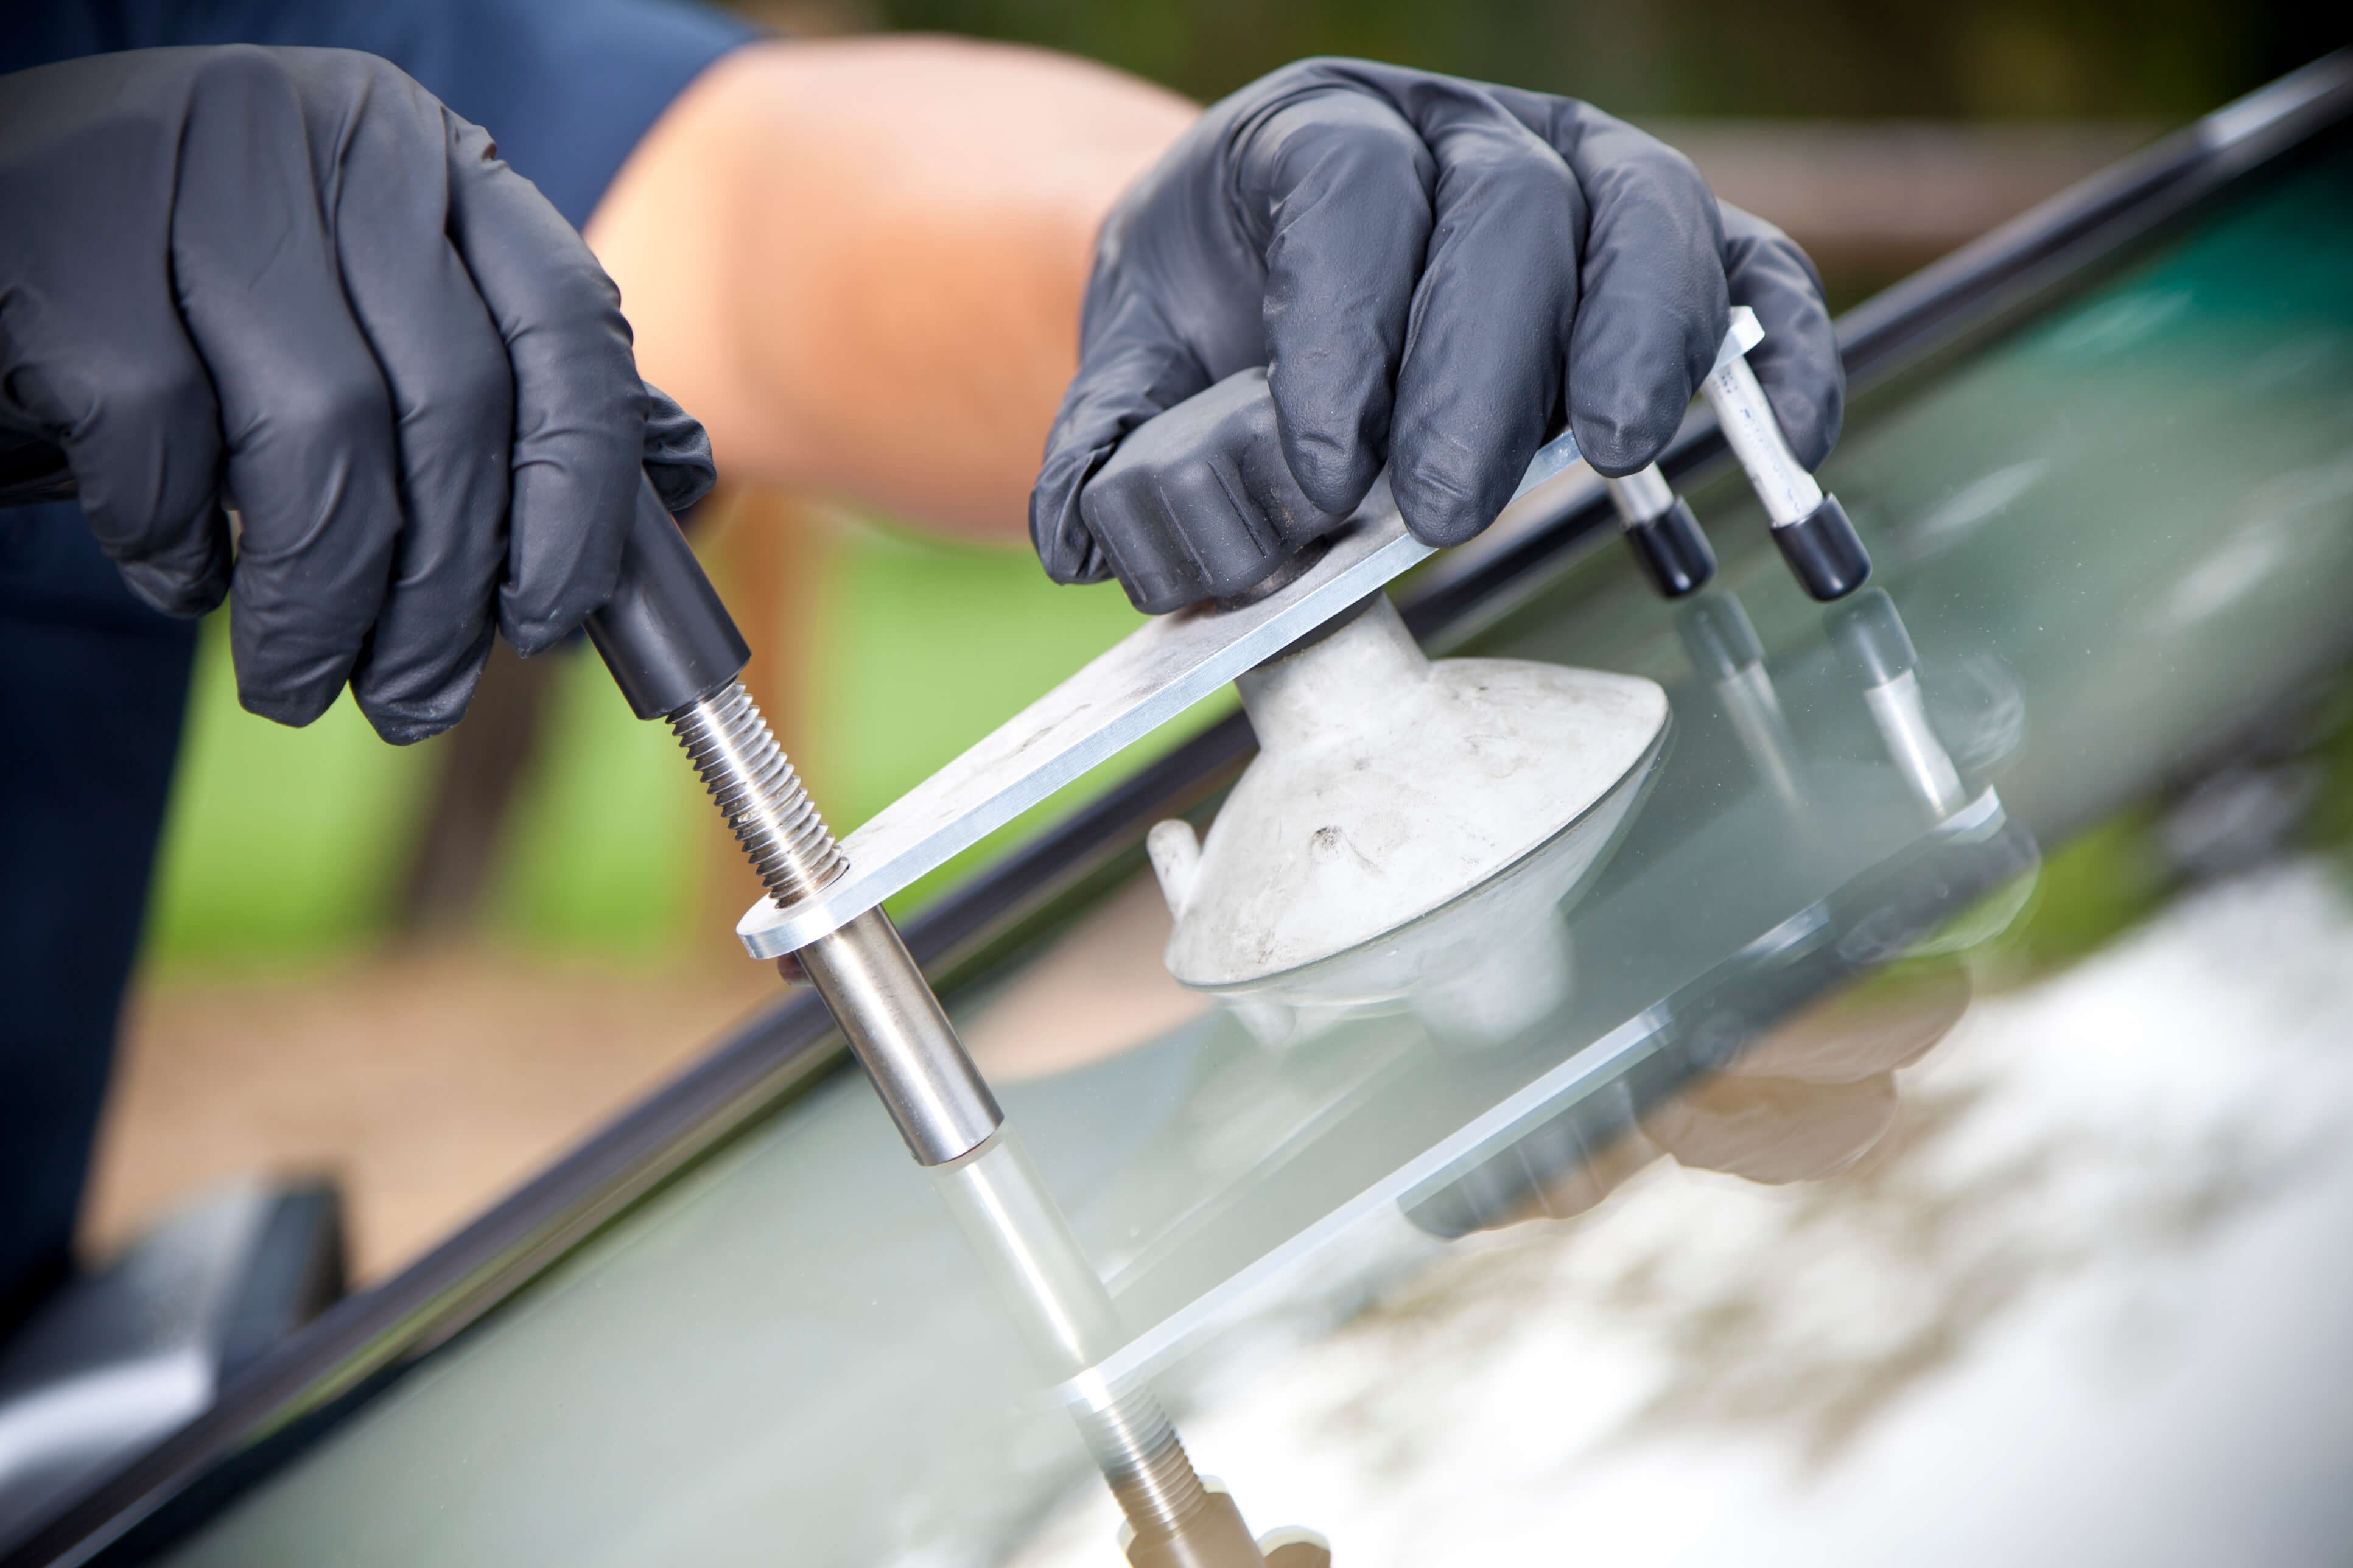 Windshield Repair Mississauga - In N Out Car Wash How Much Is To Repair A Windshield